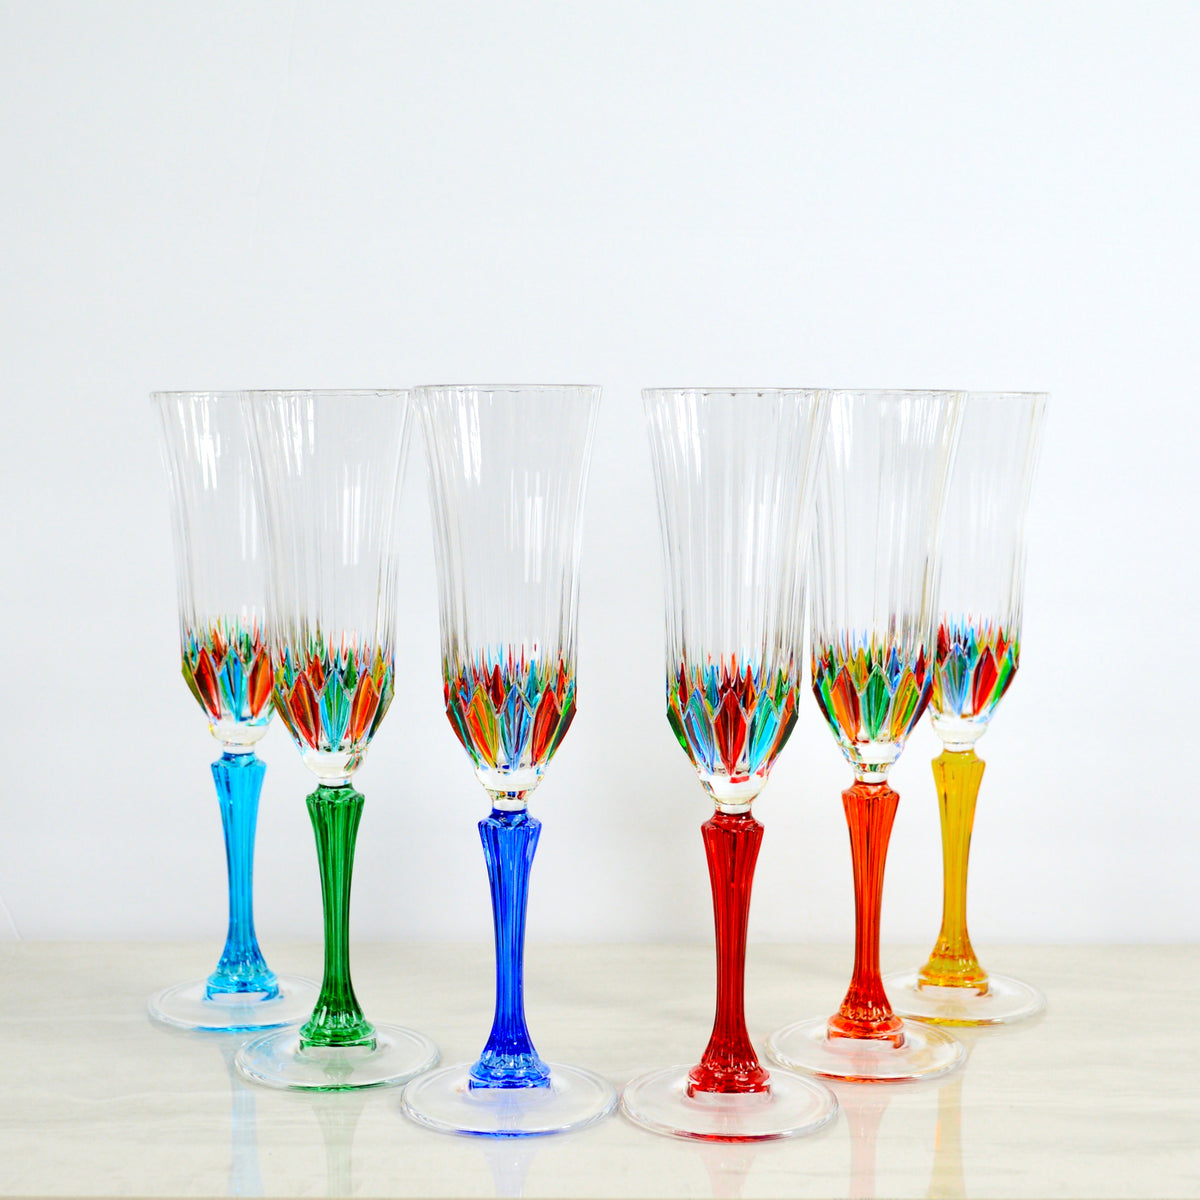 Hand Painted Italian Crystal Demi Swatch Champagne Glasses, Set of 2 - My Italian Decor